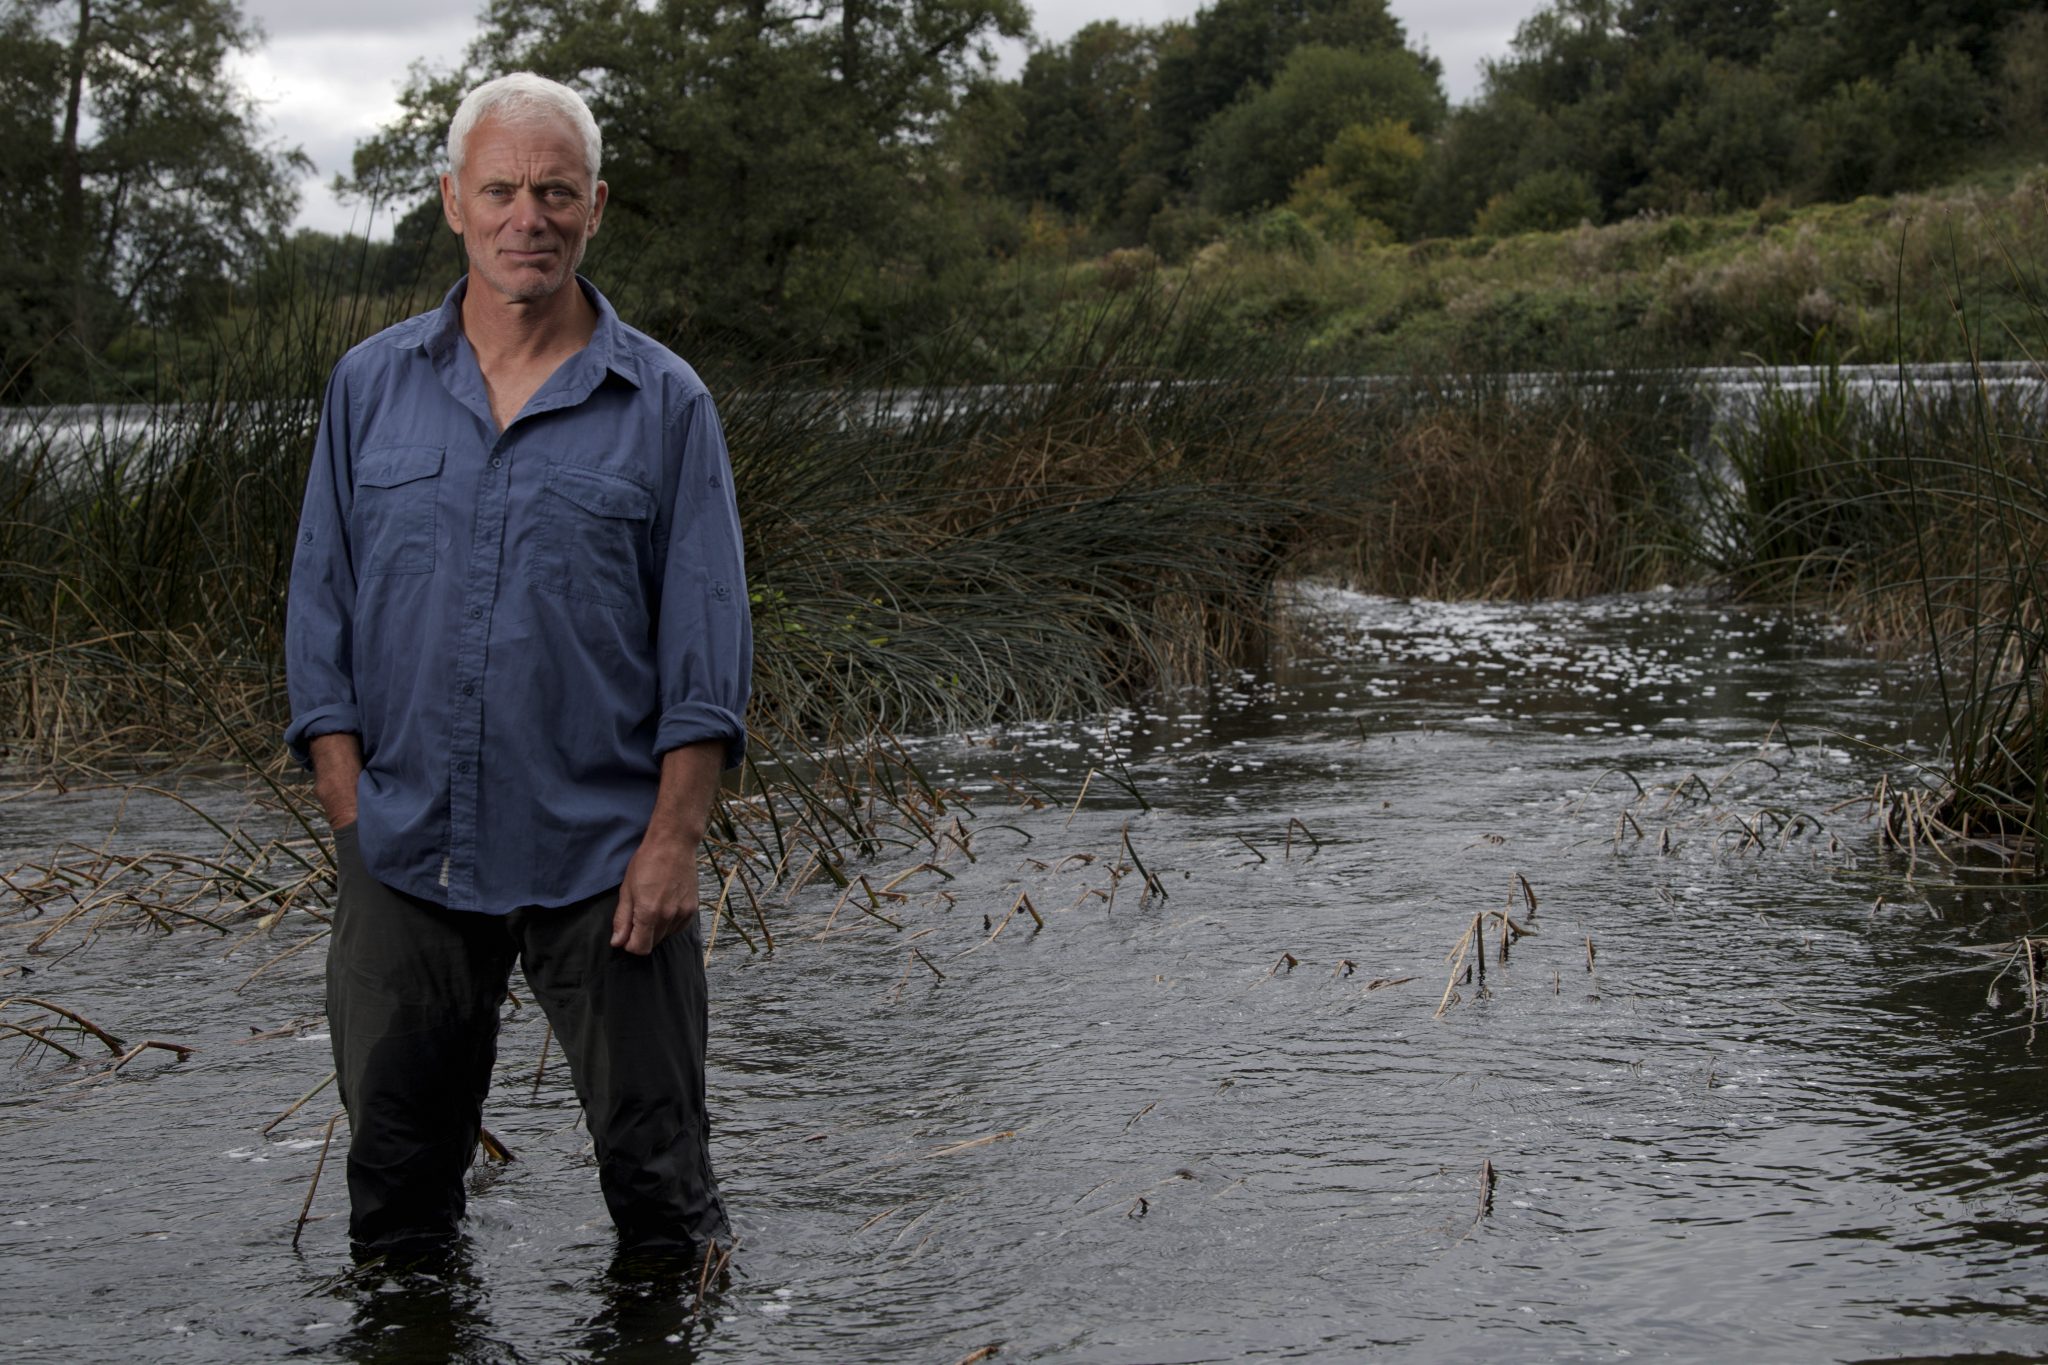 Jeremy Wade returns to Animal Planet for 'Dark Waters' - TBI Vision